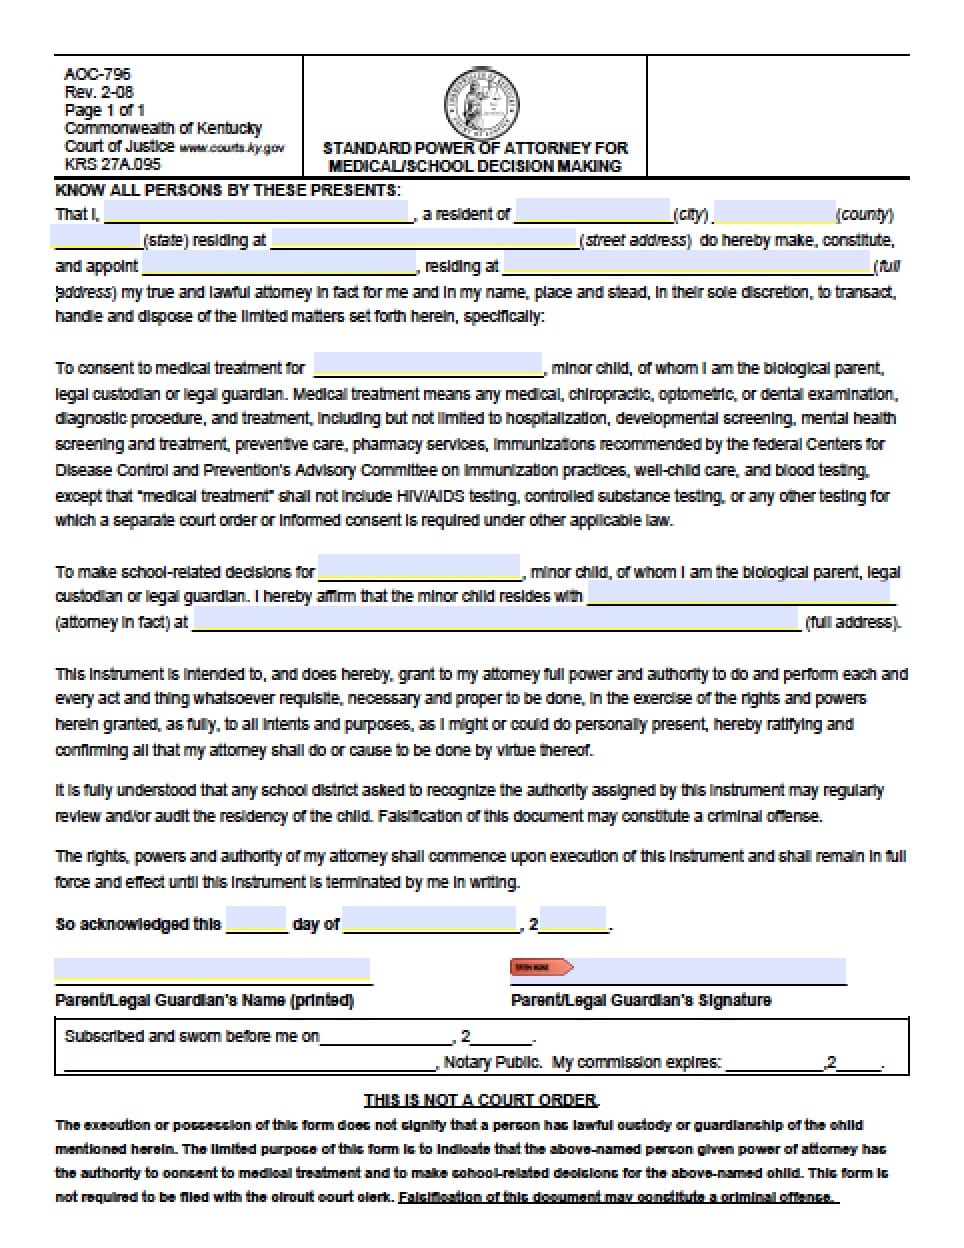 download-kentucky-medical-power-of-attorney-form-for-free-page-3